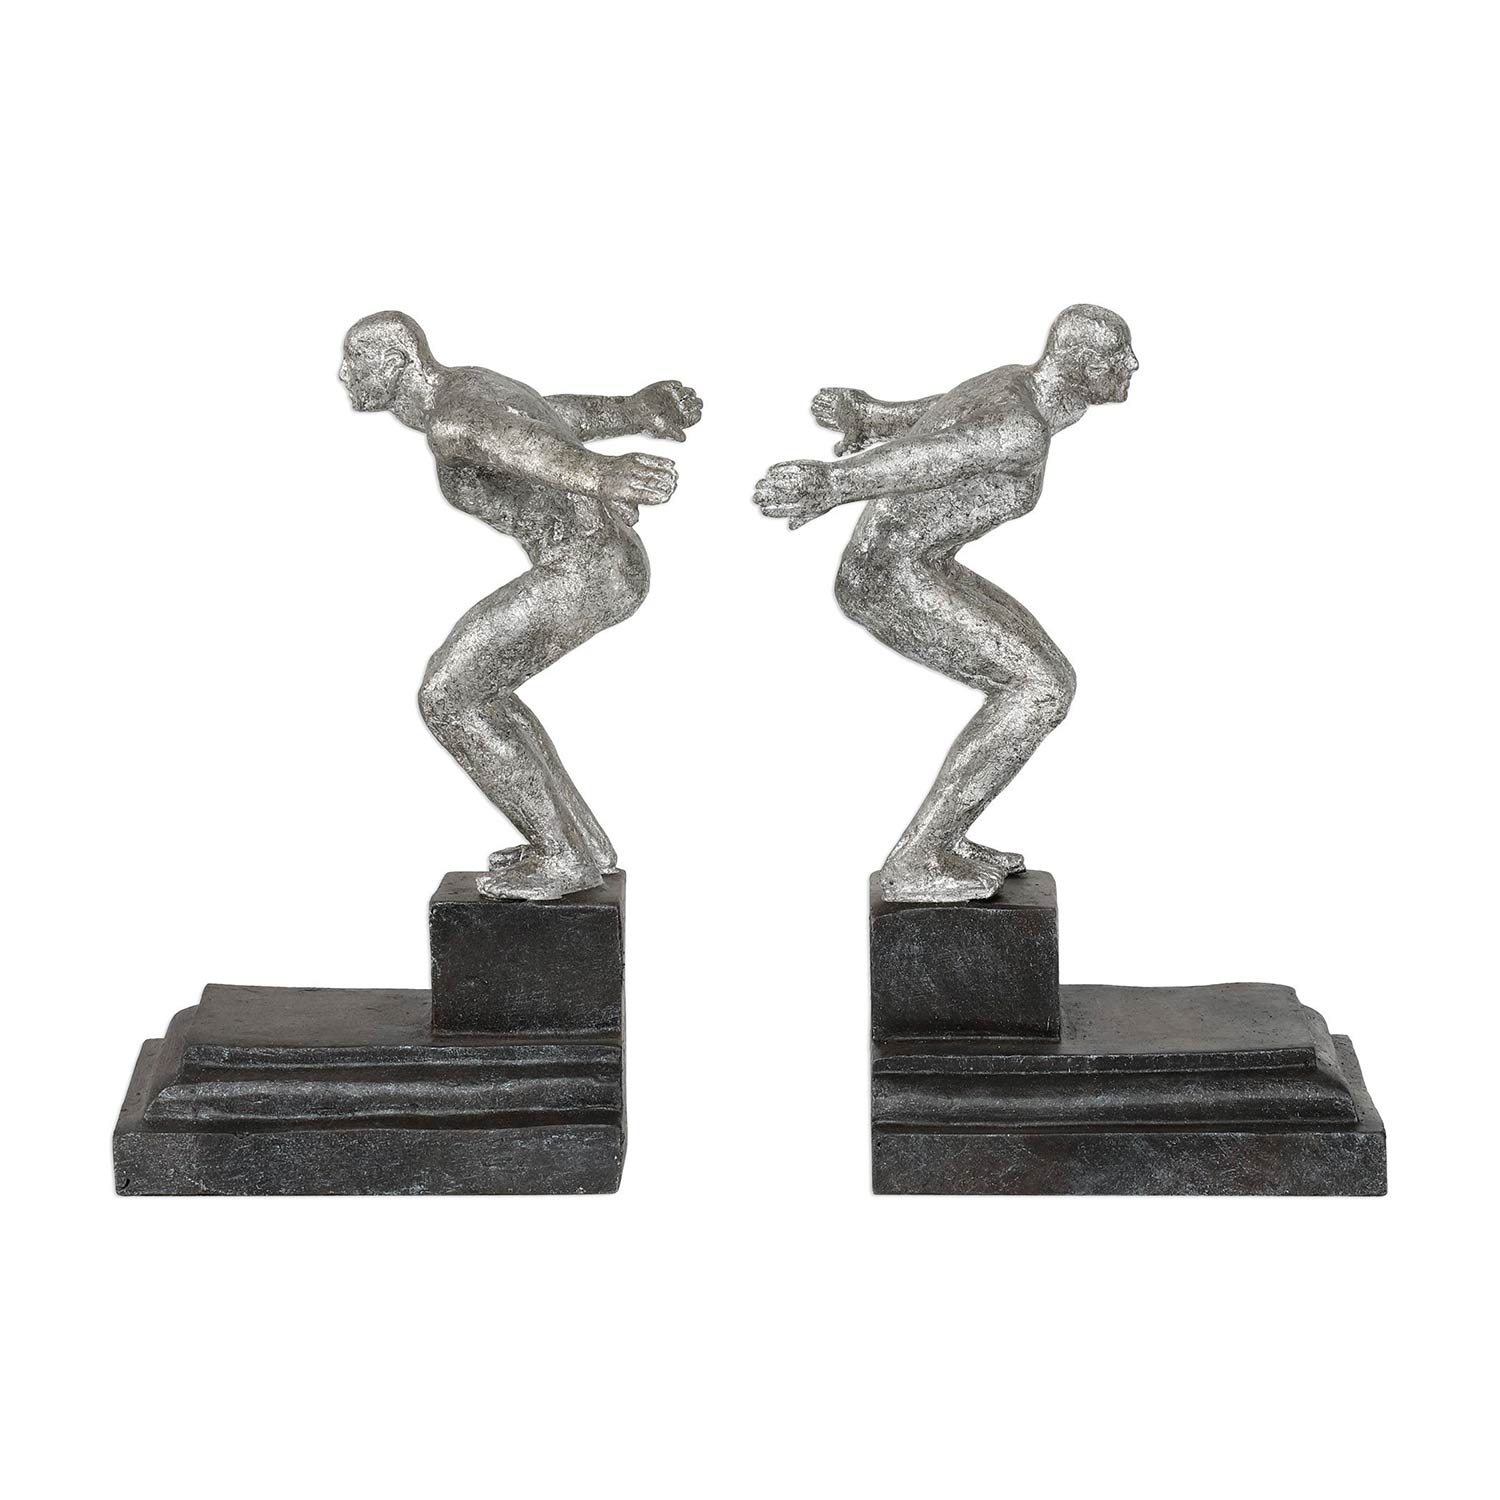 Uttermost Endurance Bookends - Silver - Set of 2